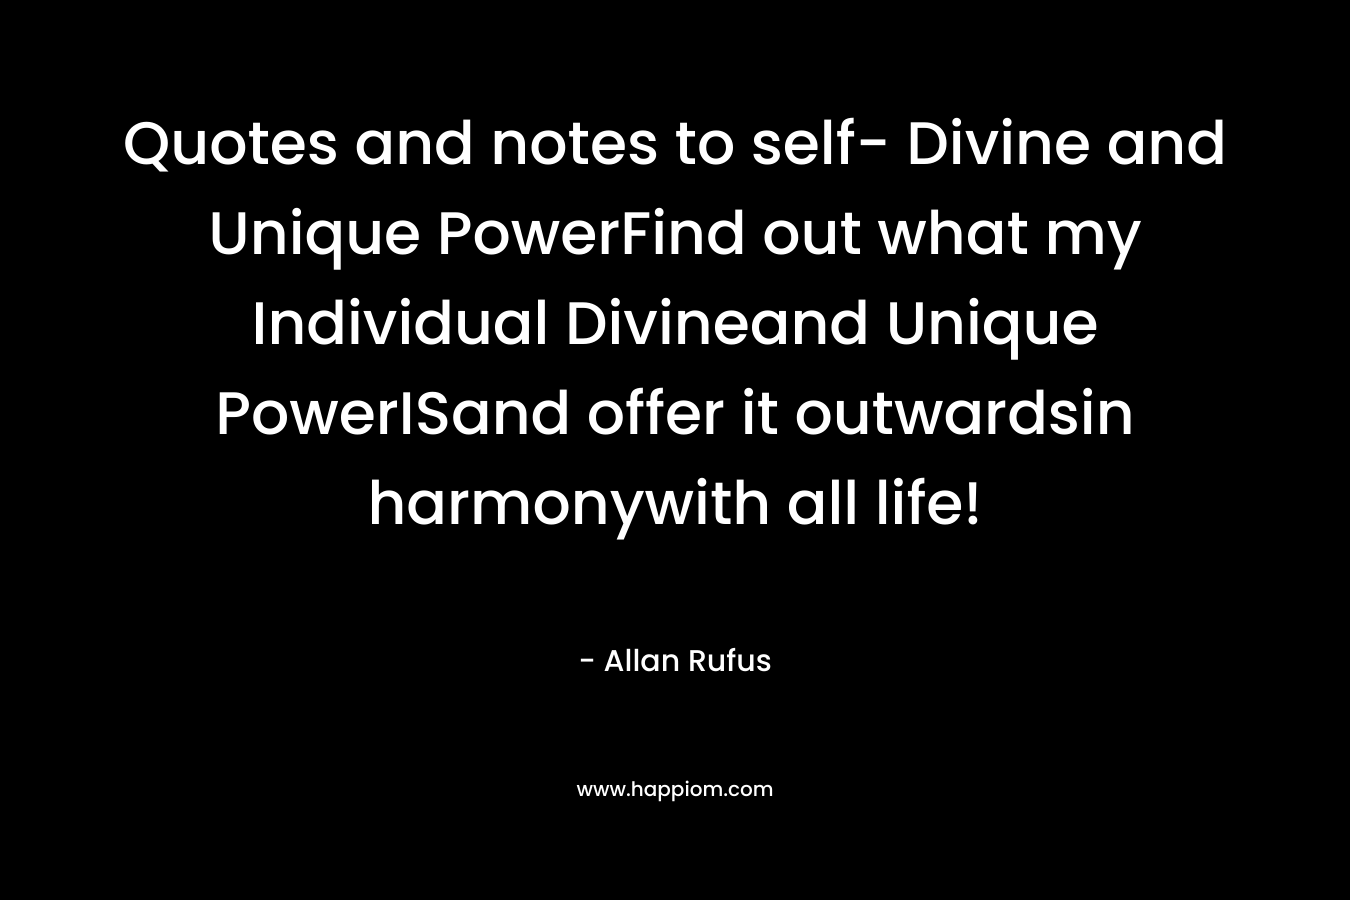 Quotes and notes to self- Divine and Unique PowerFind out what my Individual Divineand Unique PowerISand offer it outwardsin harmonywith all life!